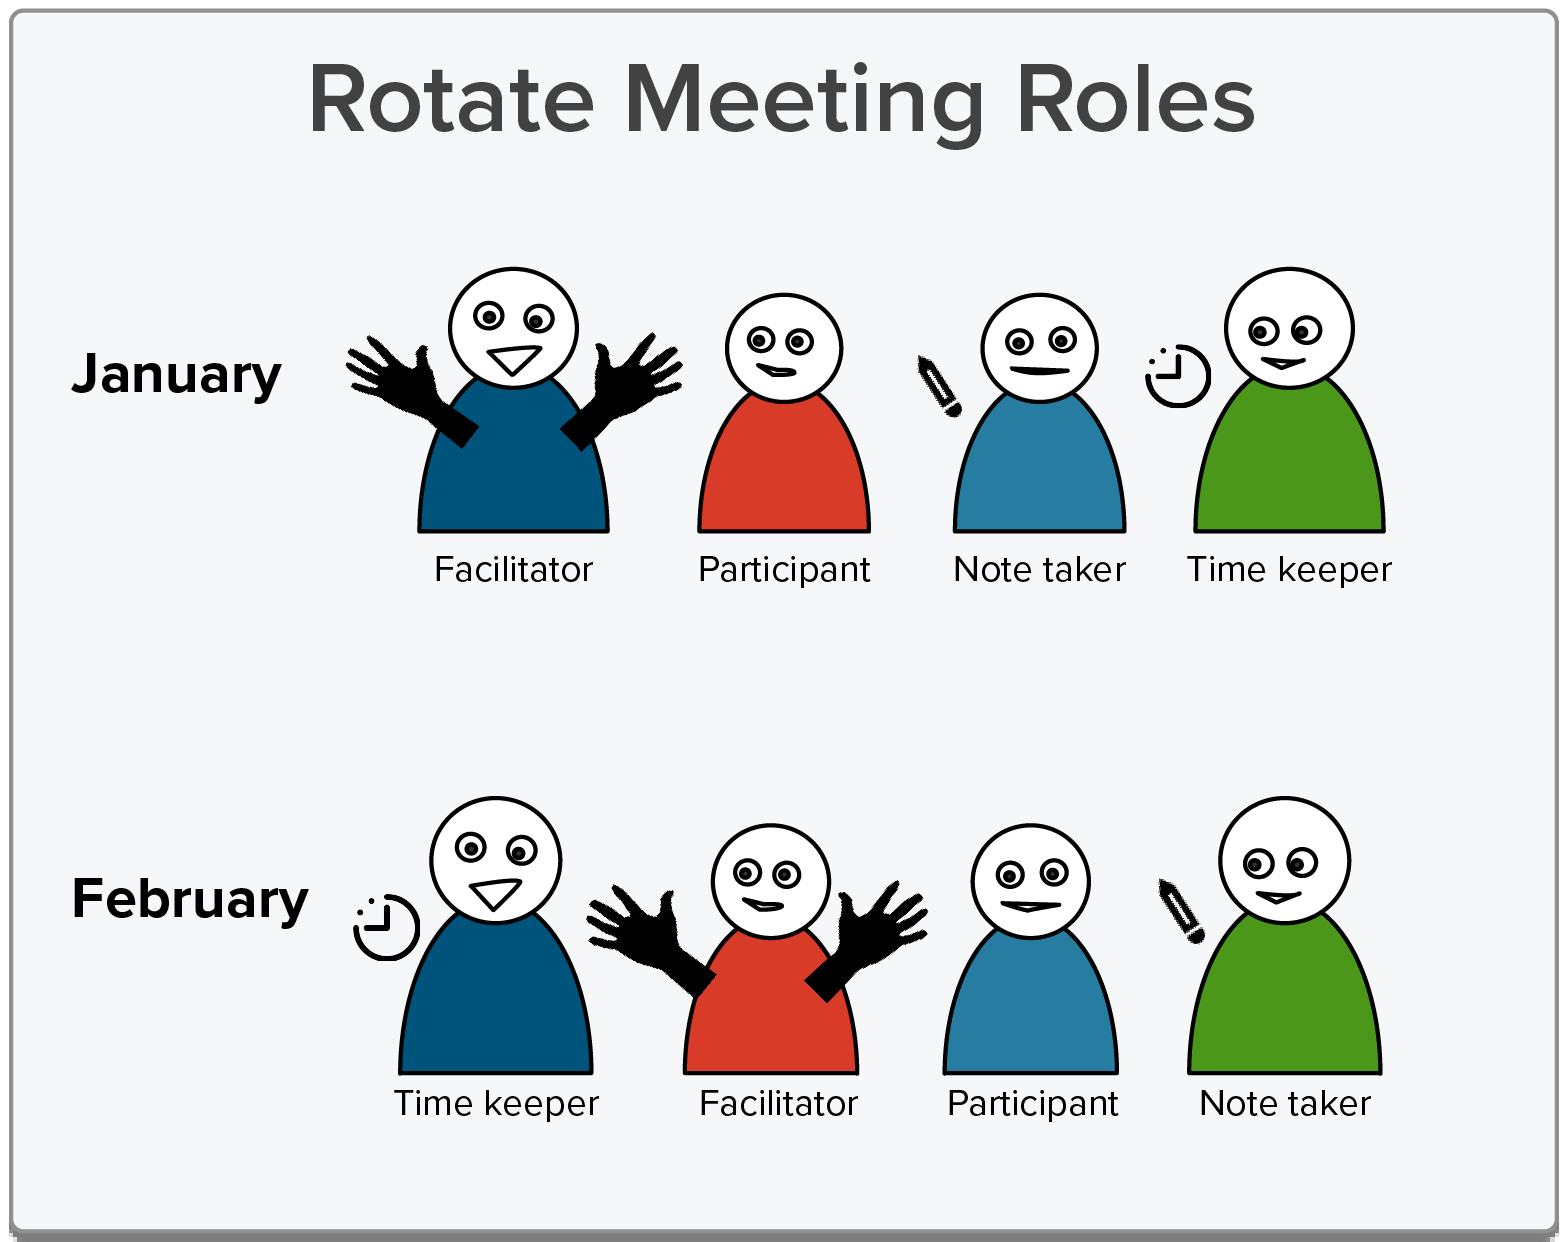 Trade meeting roles each month